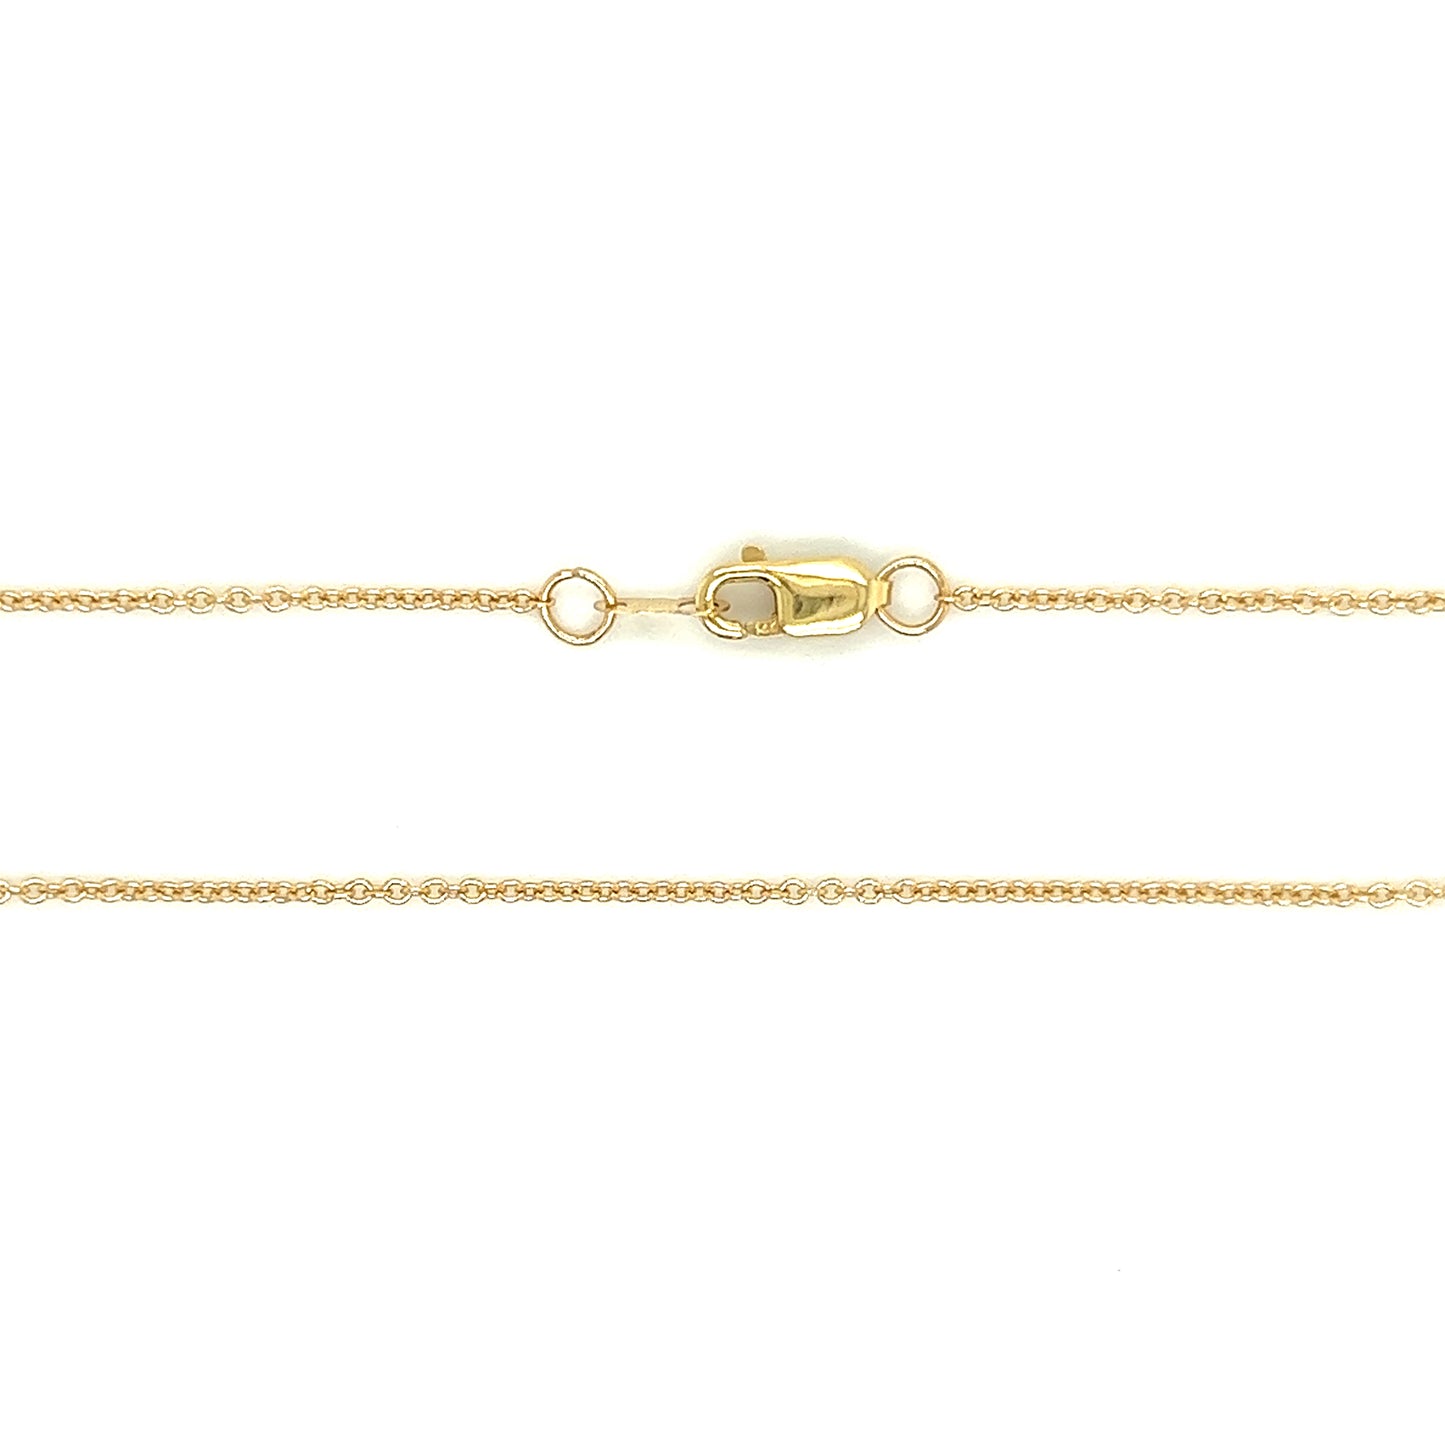 Cable Chain 1mm with 16in of Length in 14K Yellow Gold Clasp View